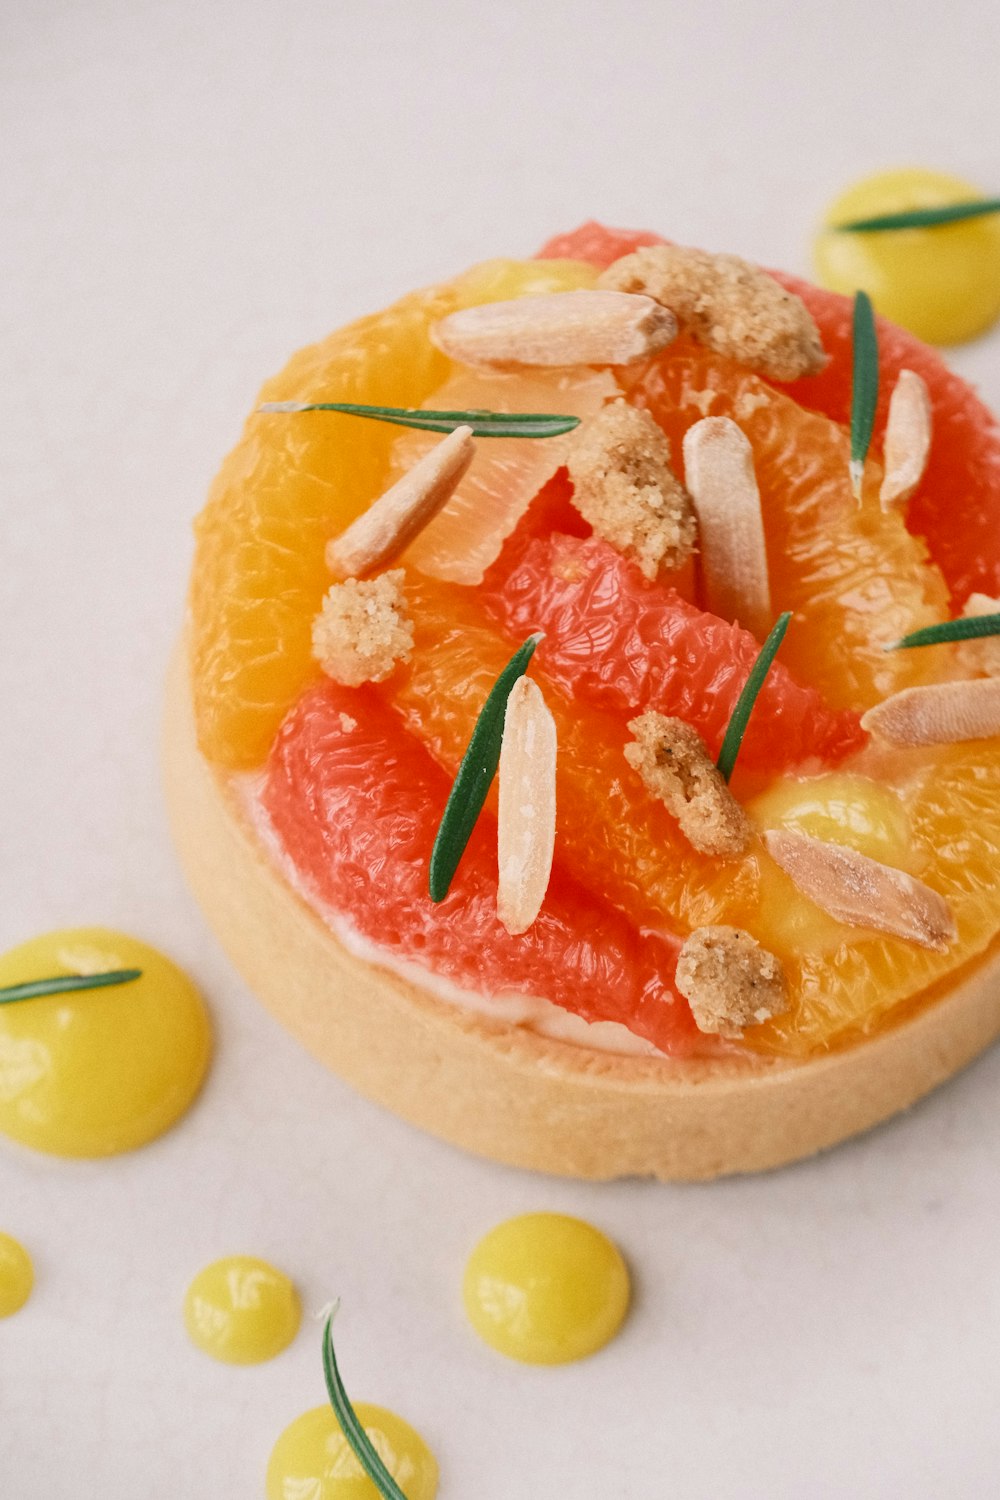 a pastry with oranges and almonds on it